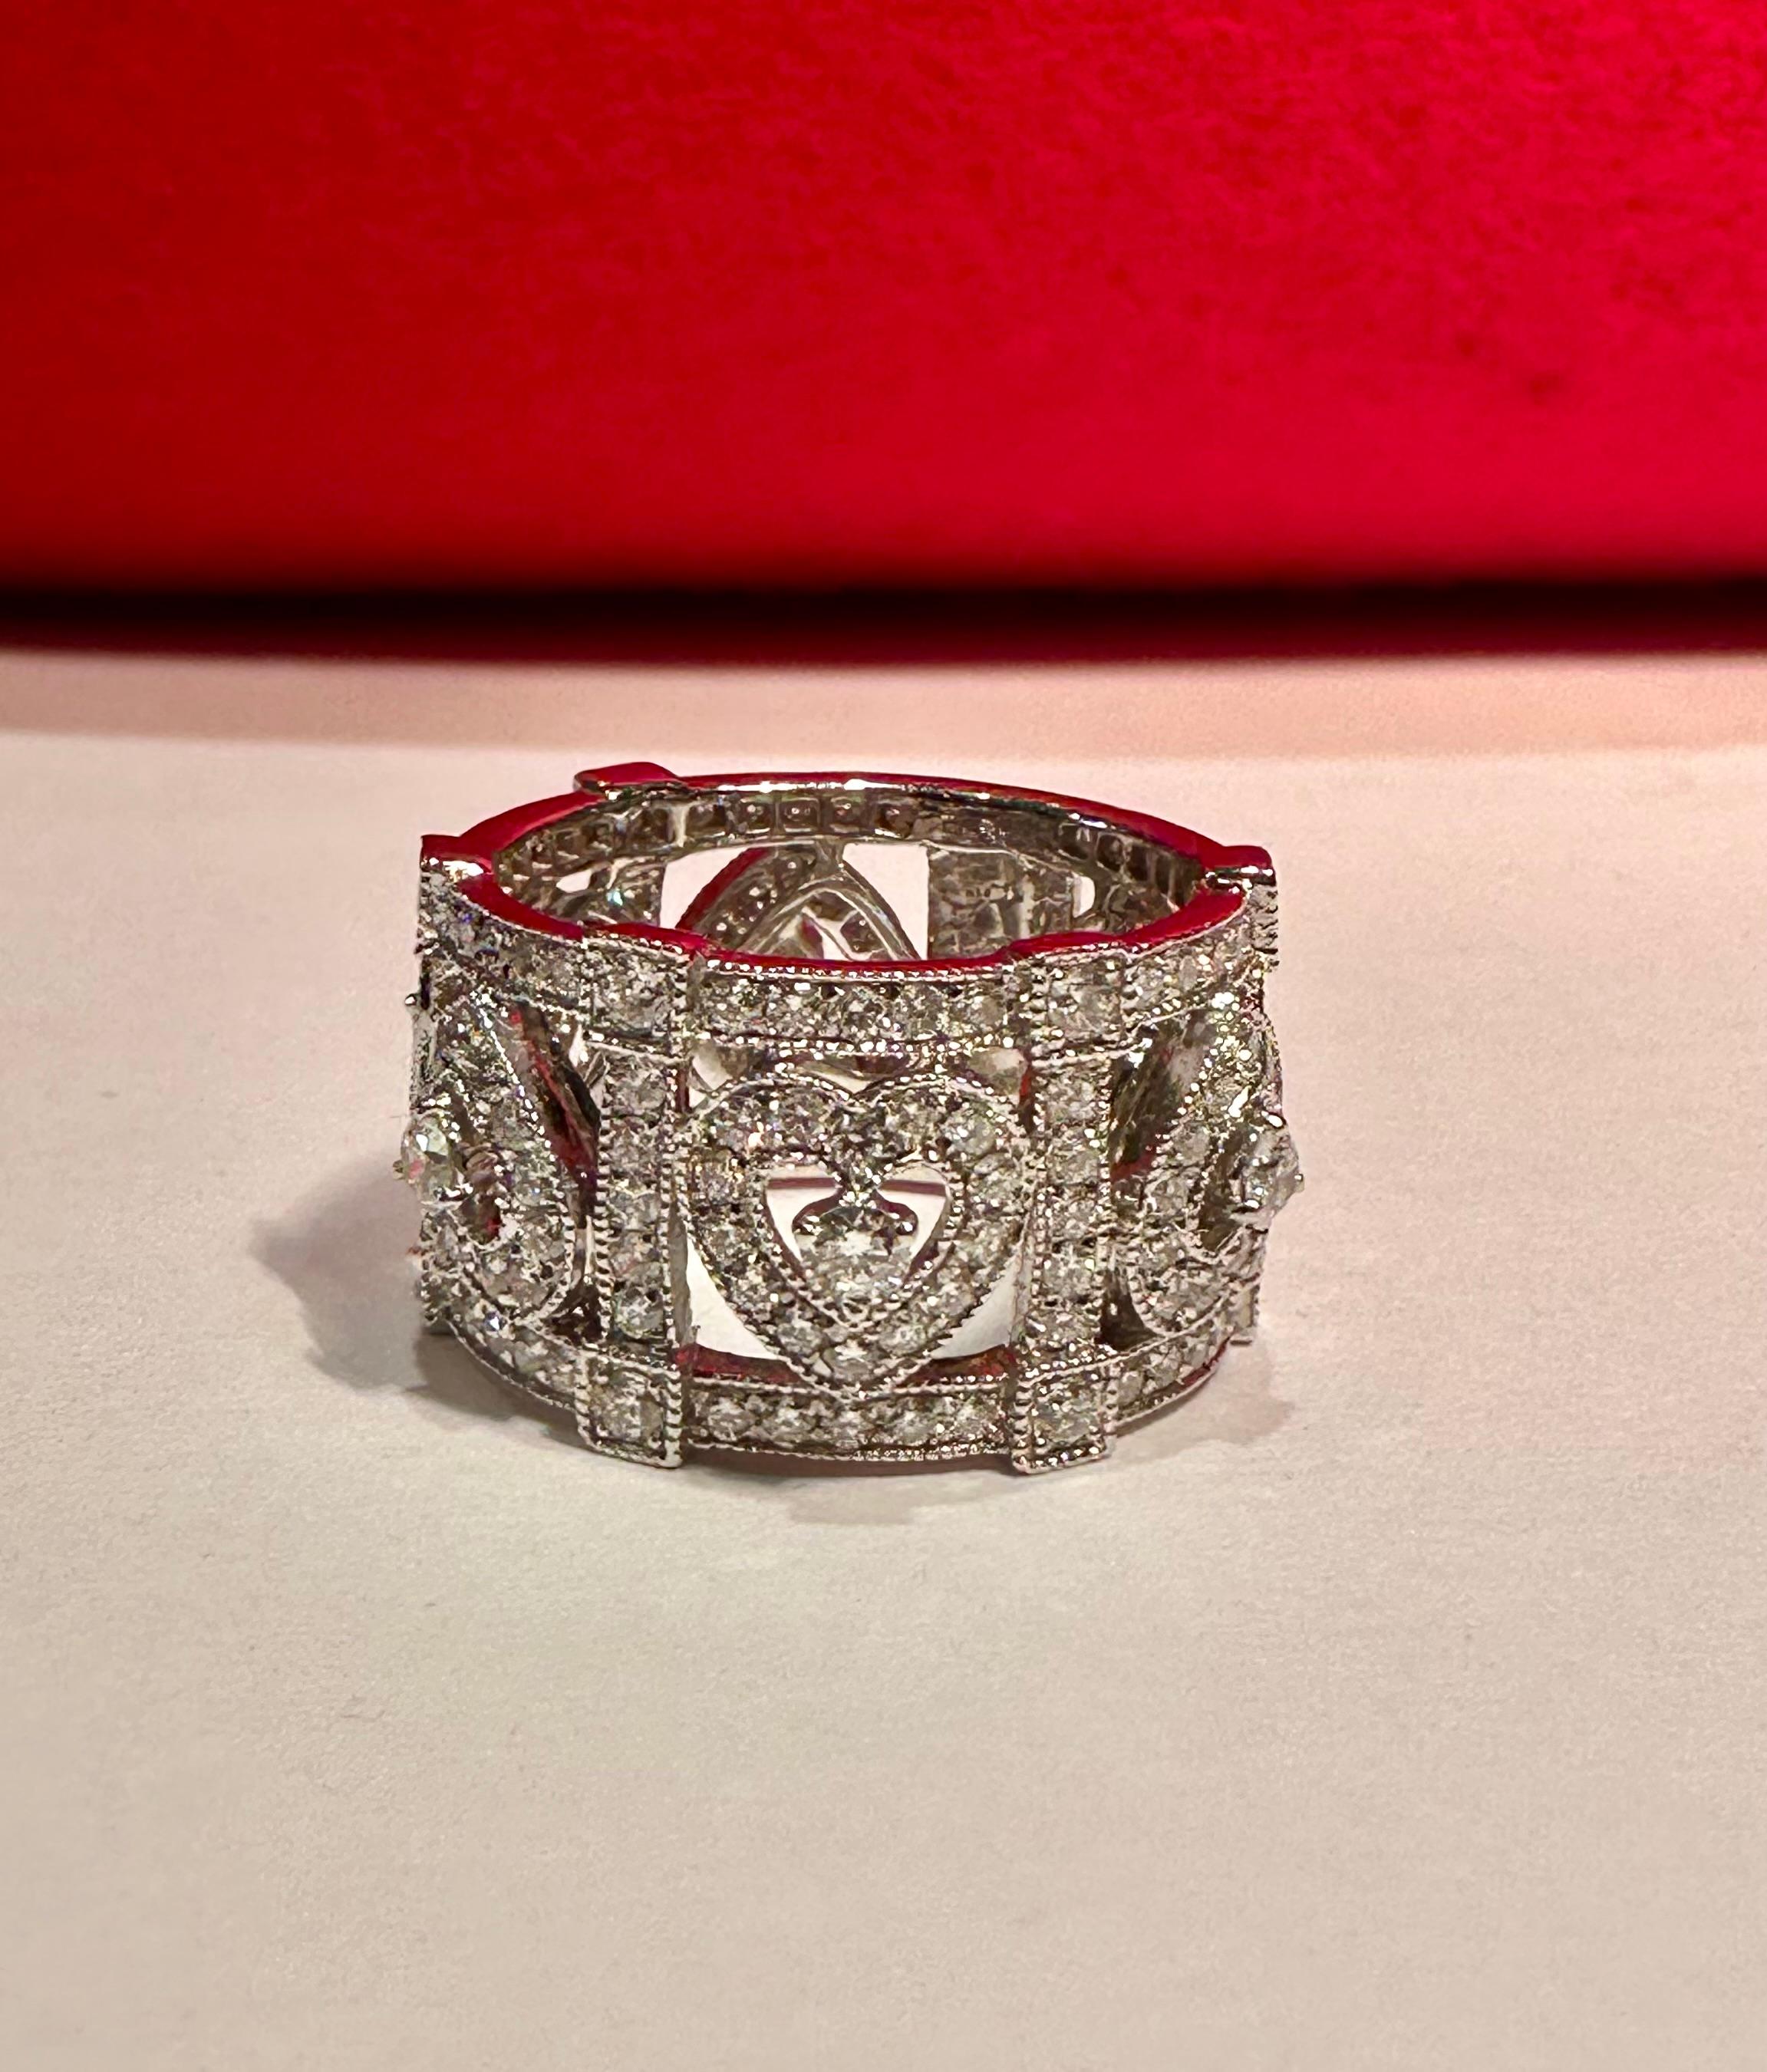 Beautiful, ladies 18 karat white gold custom made 3.75 carat diamond estate eternity like band adorned with round brilliant diamonds, pave and prong set in an elegant heart motif open work pattern.  The diamonds go almost all the way around the ring